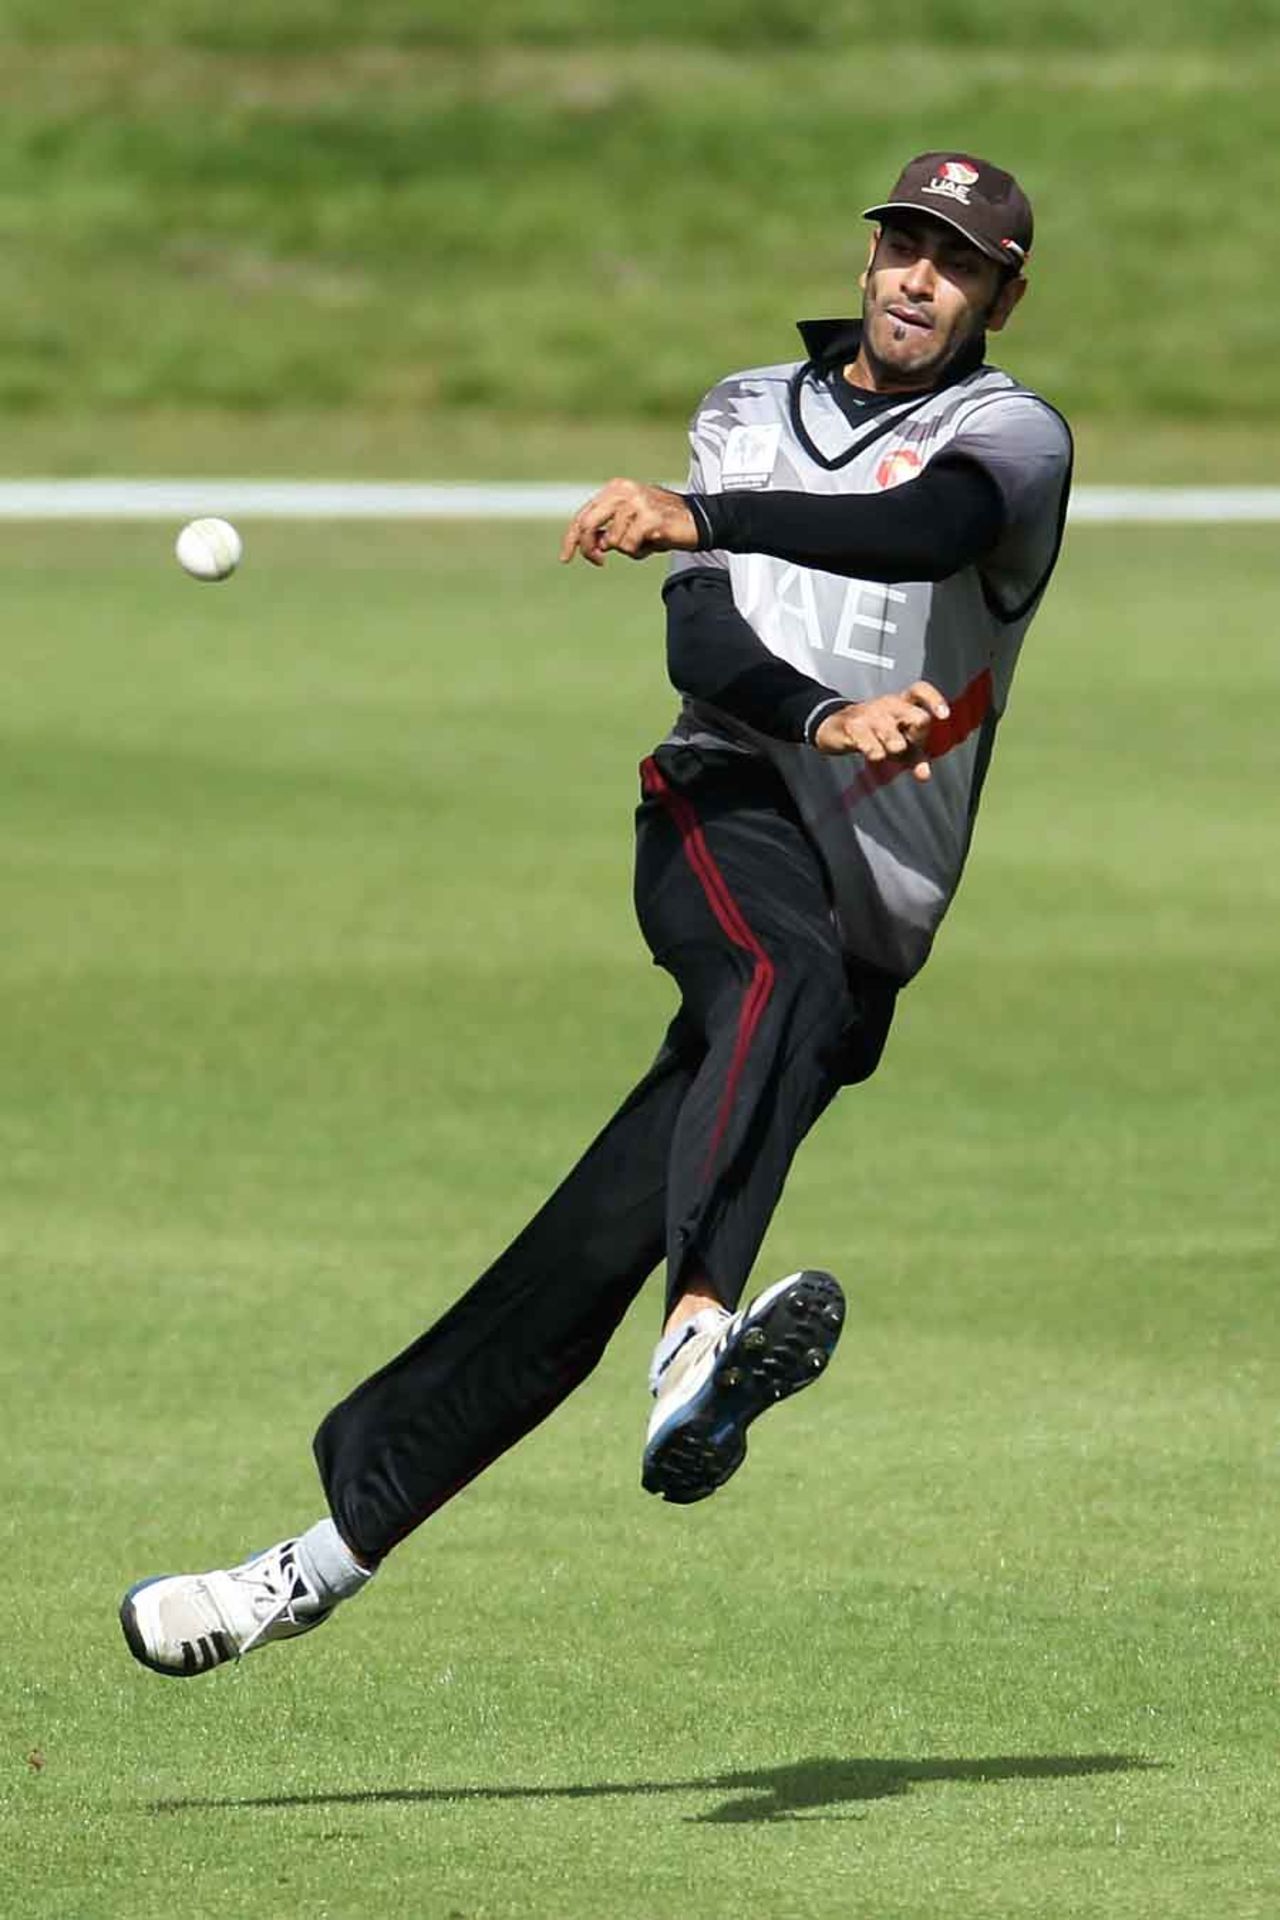 Ahmed Raza throws the ball while fielding, Nepal v UAE, World Cup Qualifier, Rangiora, January 13, 2014